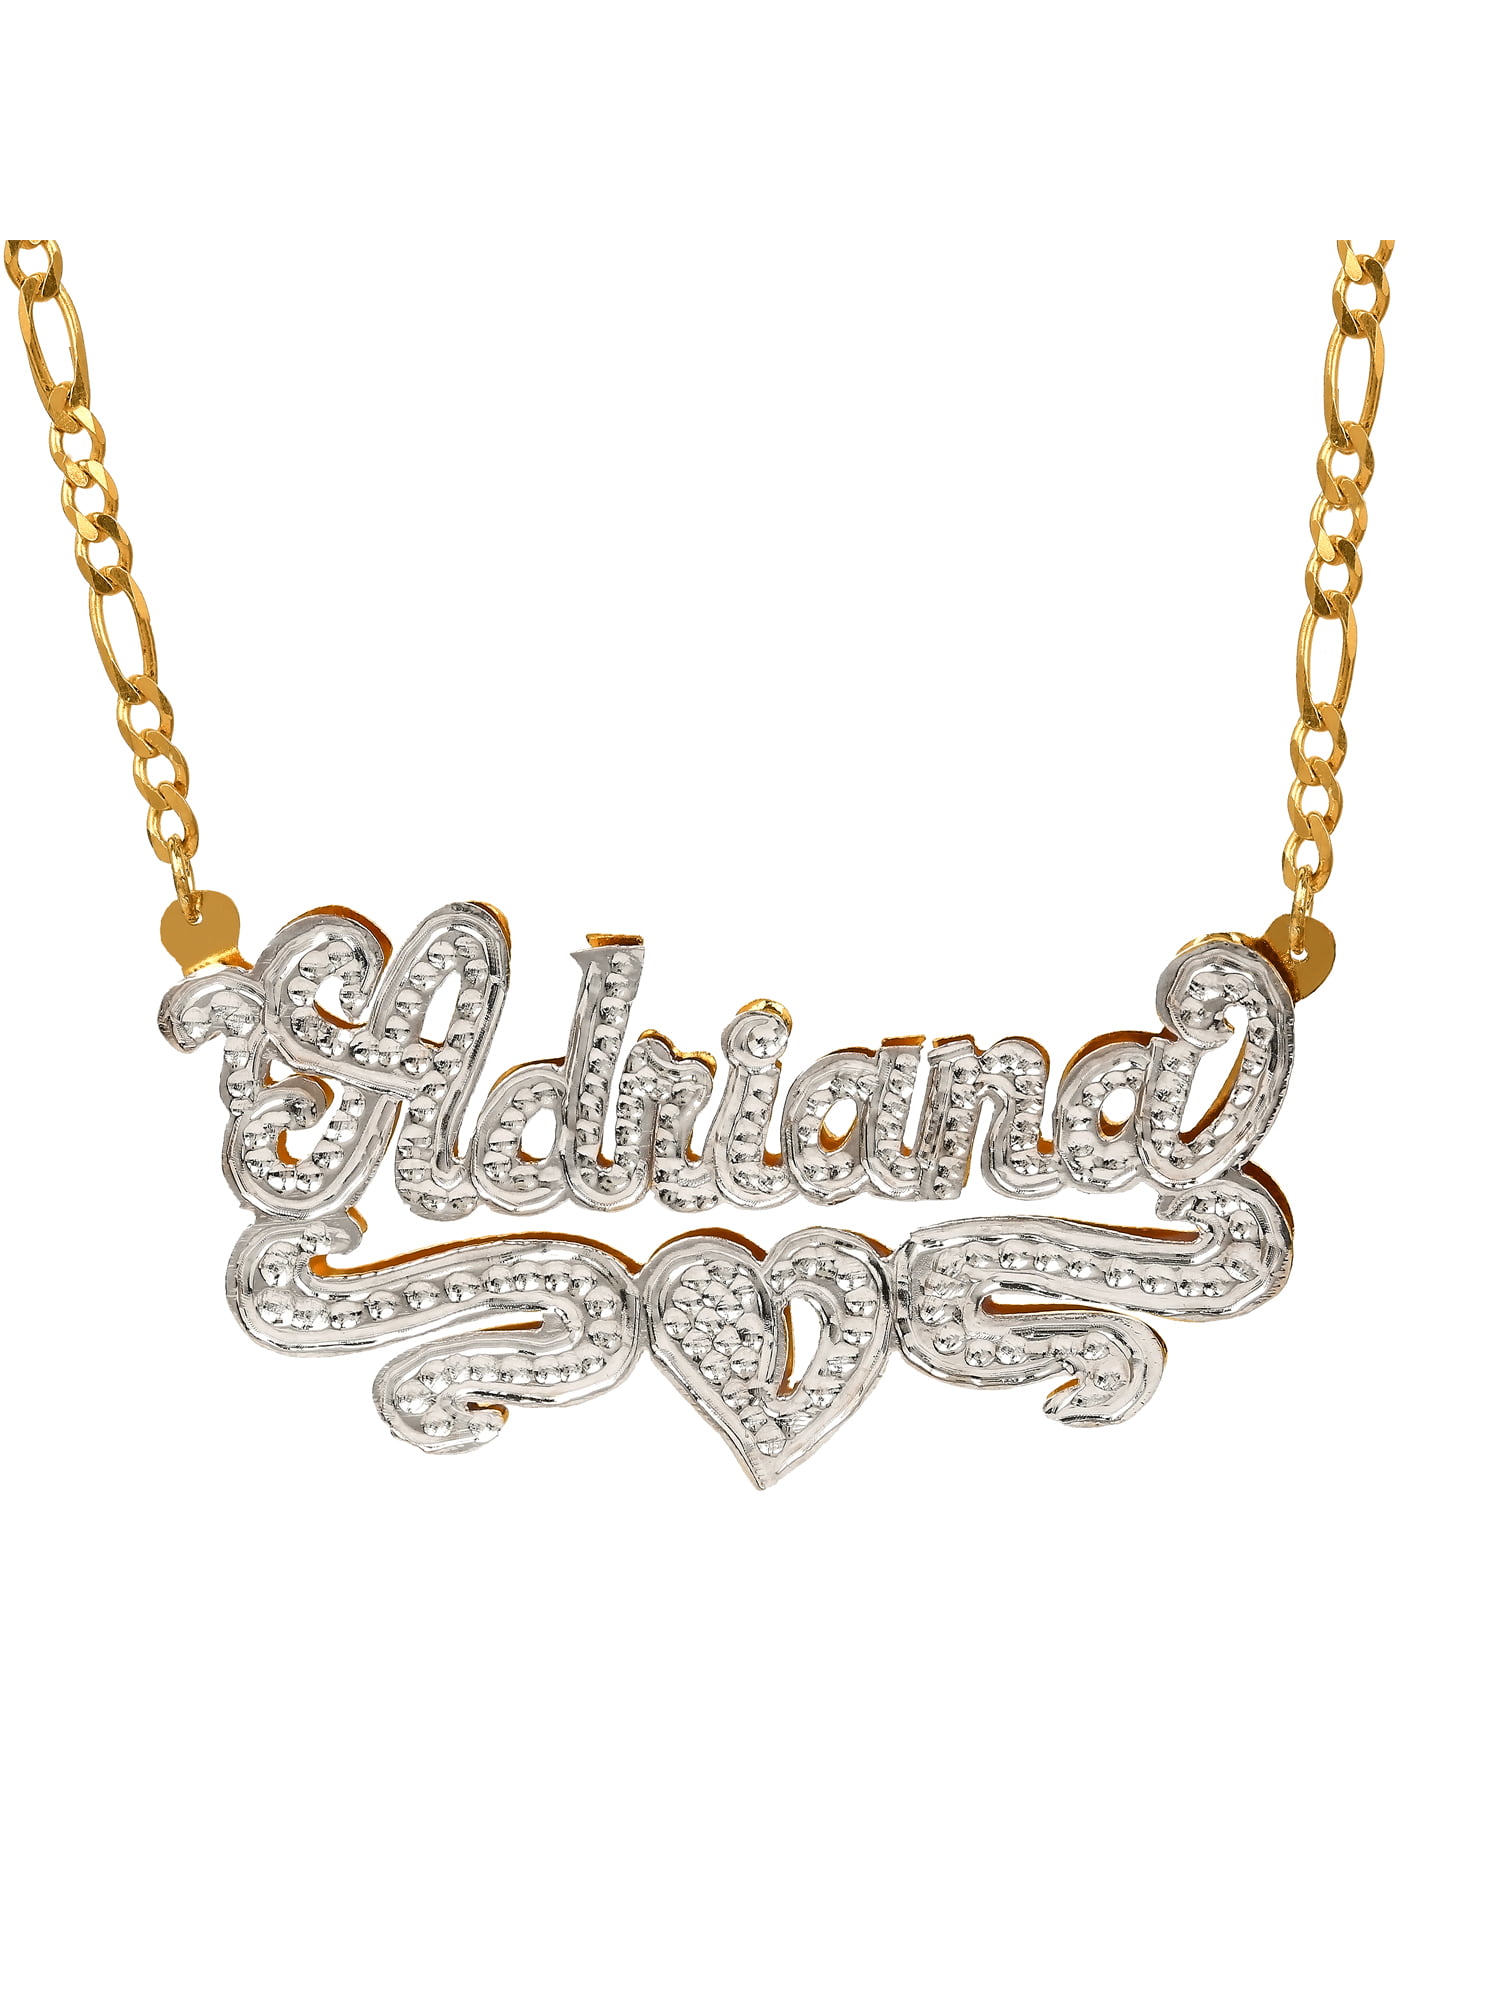 Personalized Name Plate Necklaces Online Cheapest, Save 47% | jlcatj.gob.mx